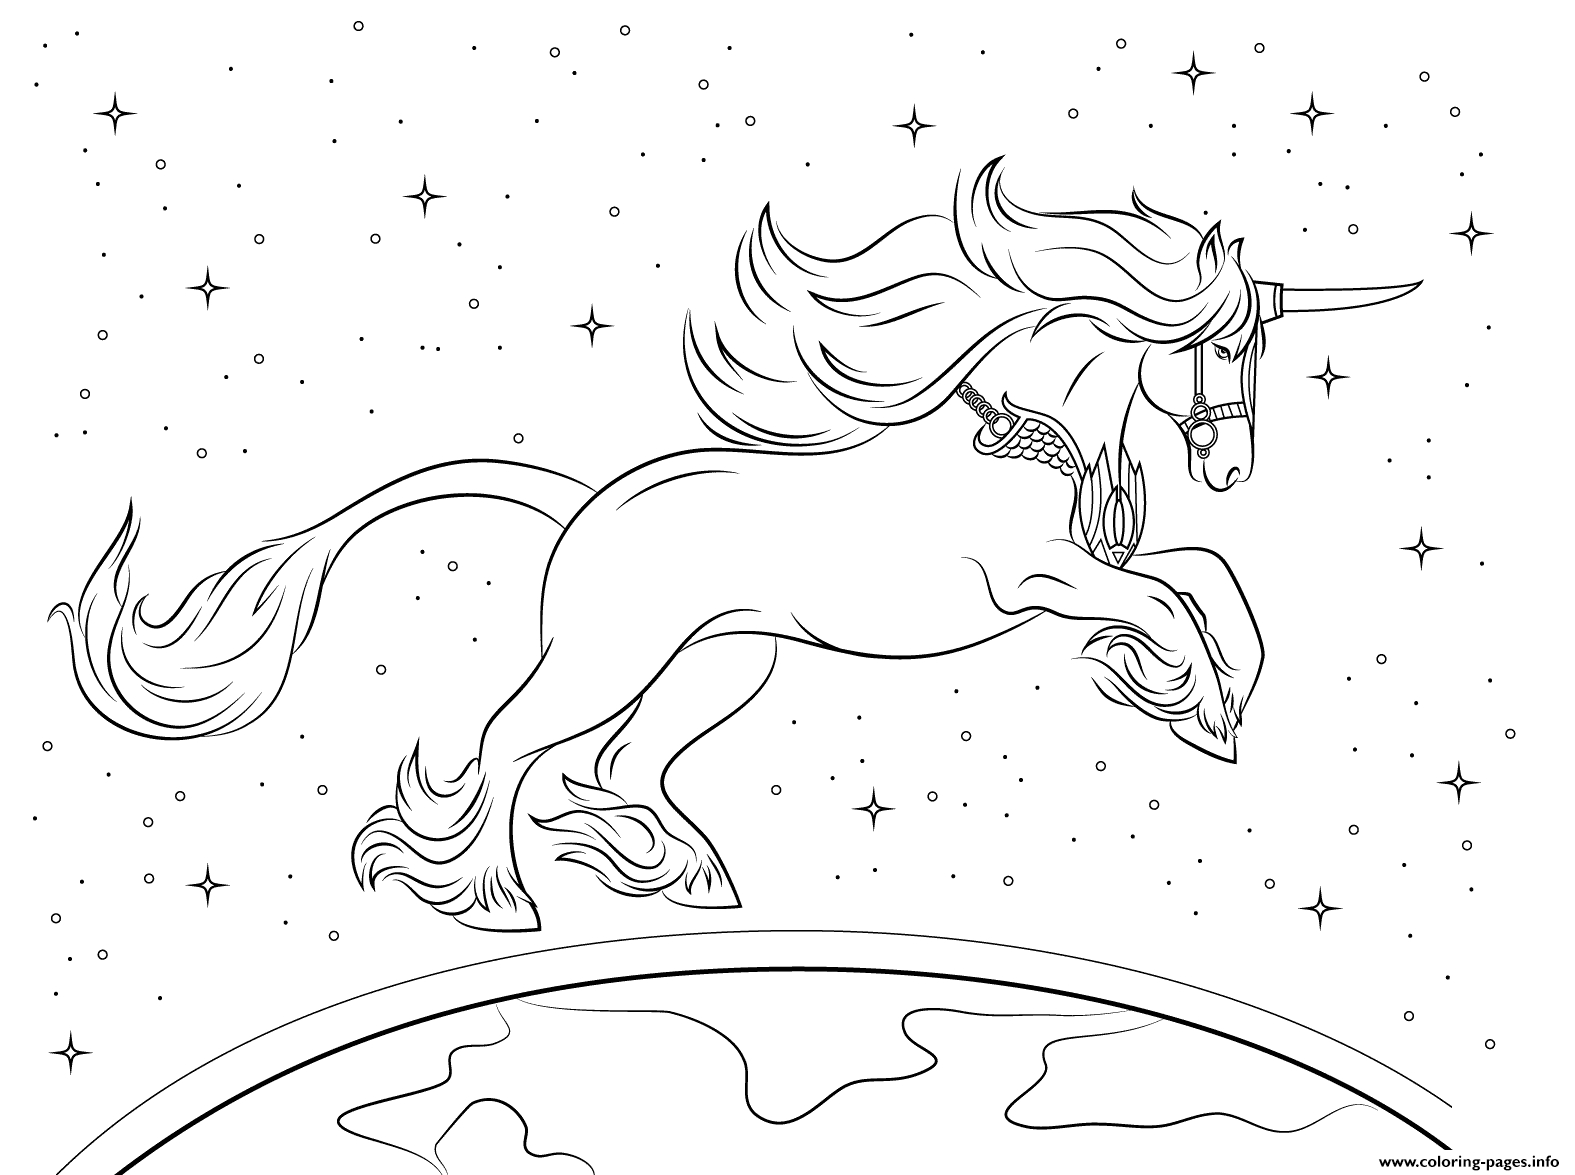 Unicorn Coloring Pages Online Beautiful Unicorn Planet Universe Coloring Pages Printable